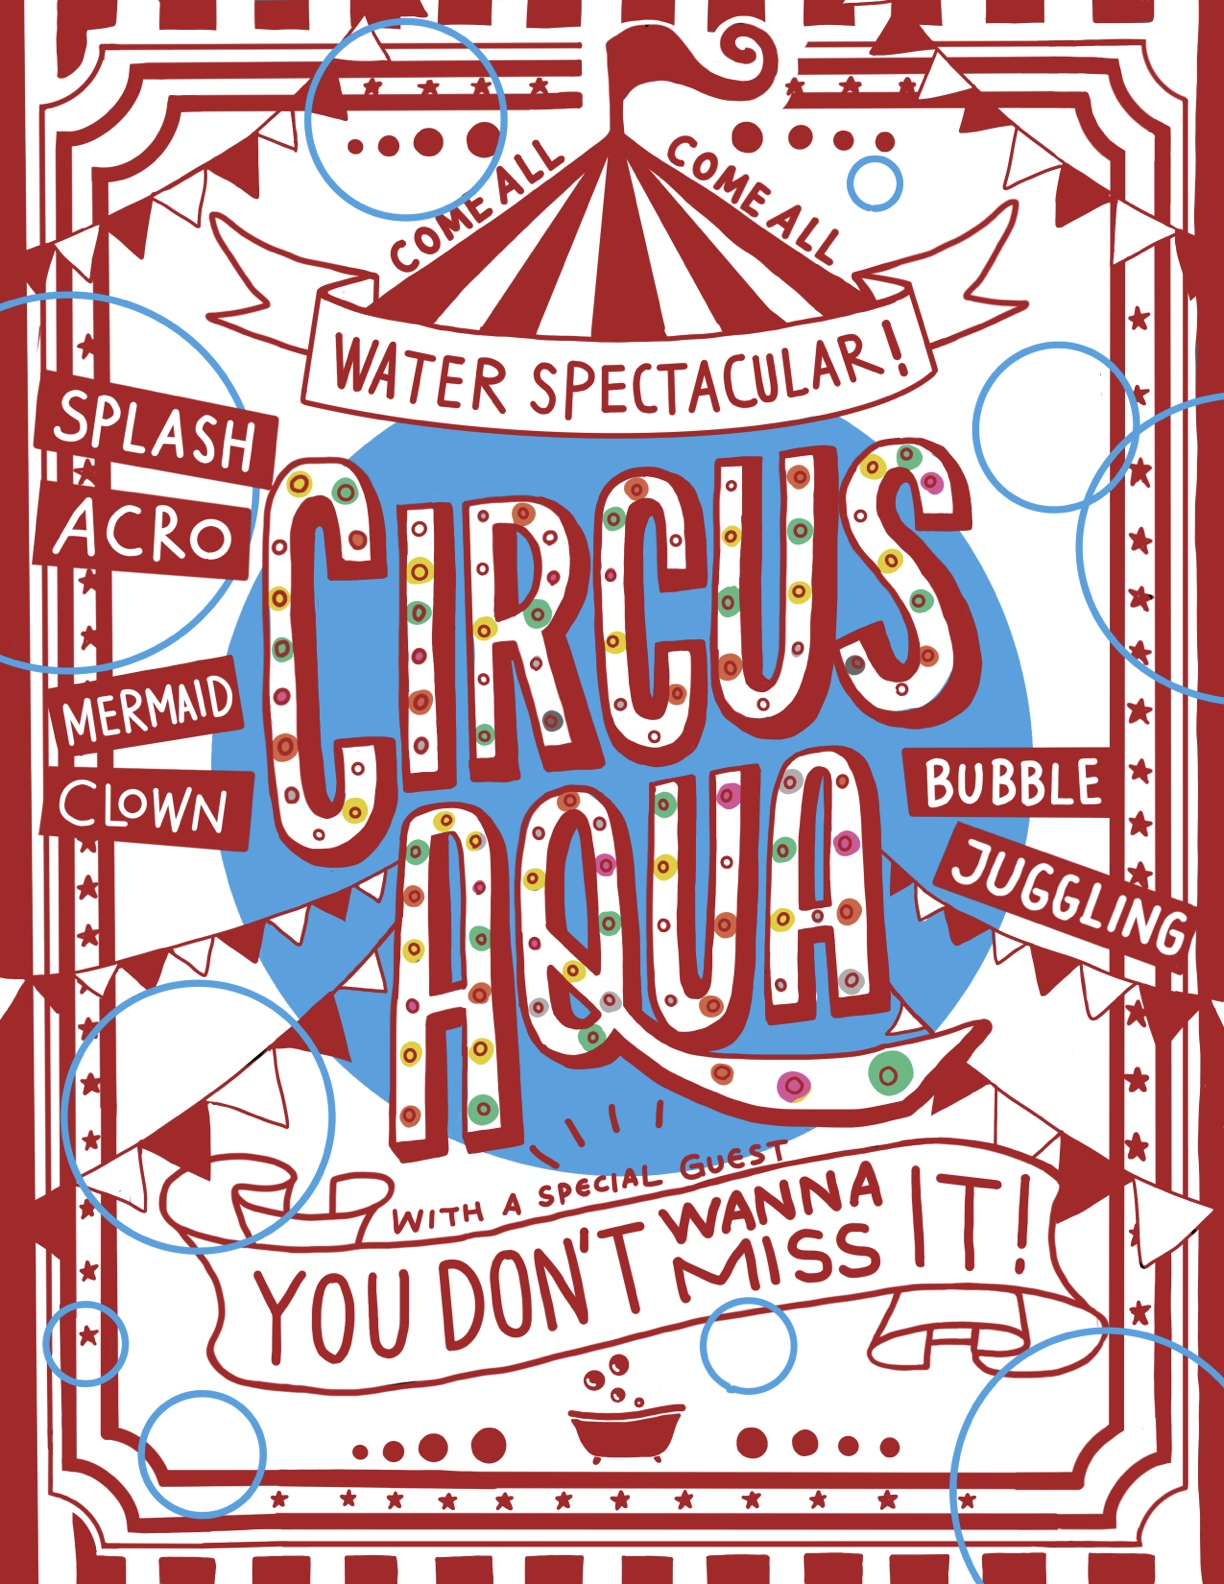 Circus poster for Circus Aqua Water Spectacular, featuring splash acro, bubble juggling and a mermaid clown!